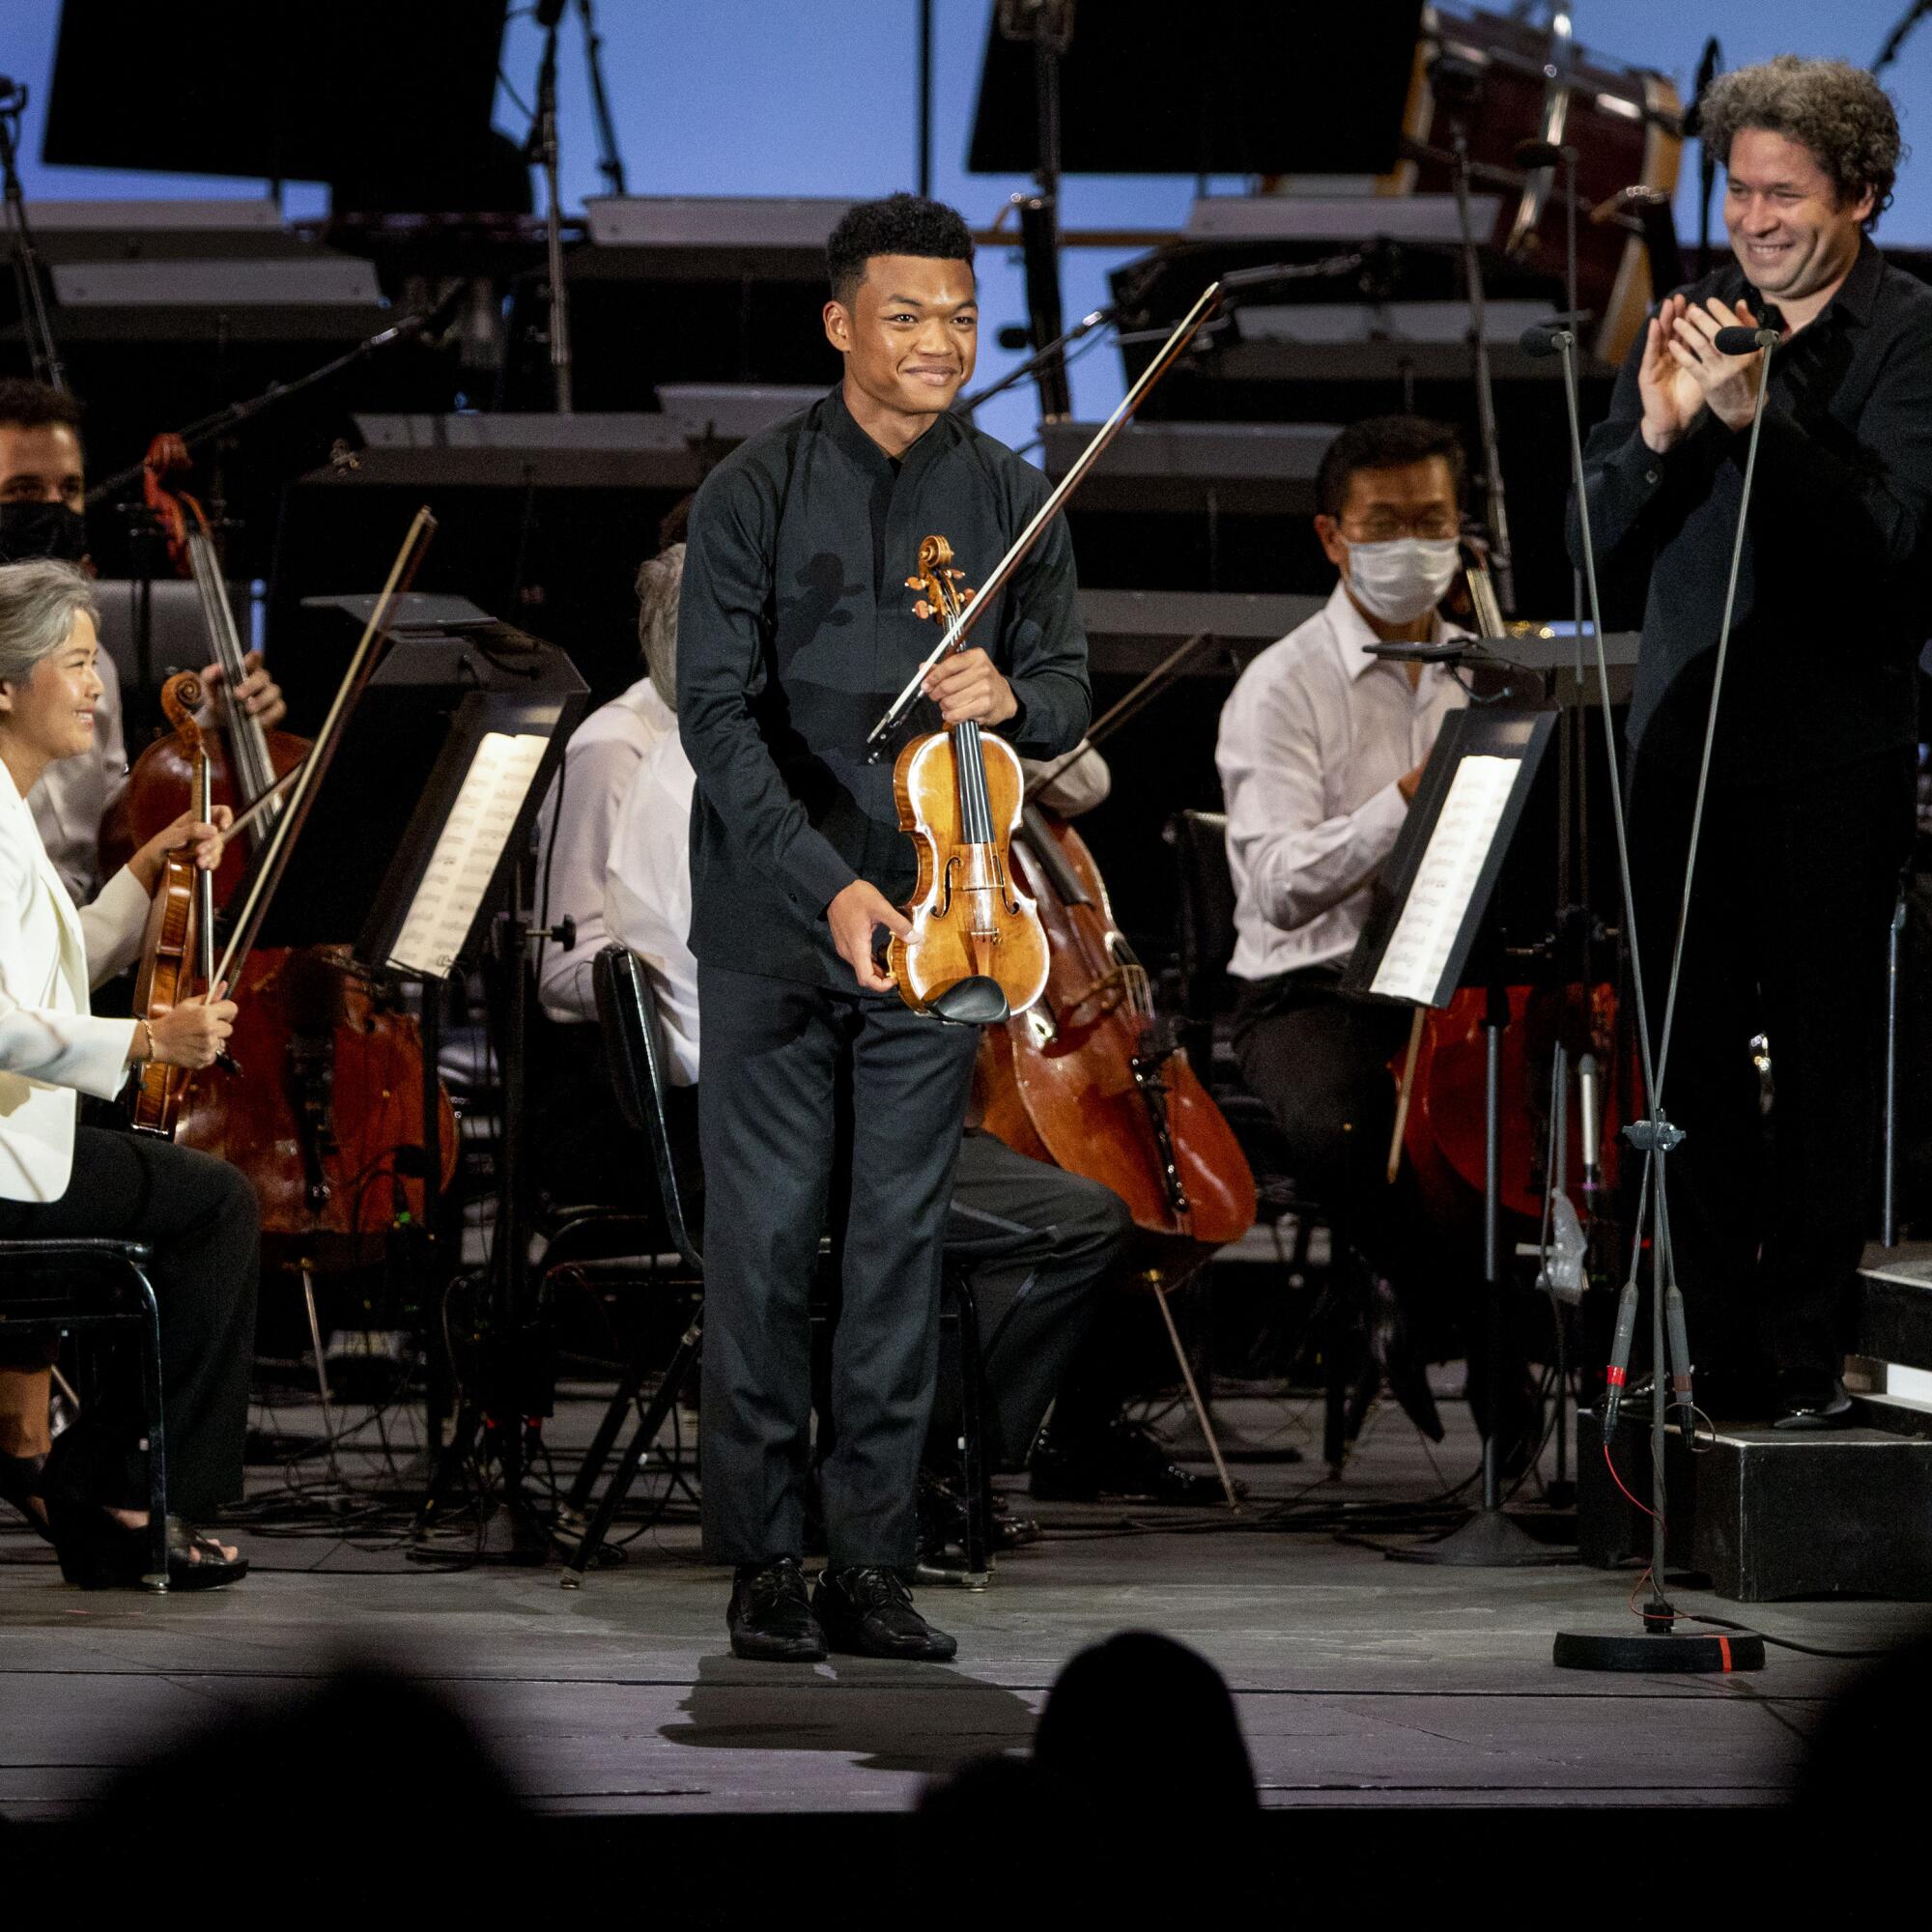 Violinist Randall Goosby takes bows as conductor Gustavo Dudamel claps at the L.A. Philharmonic's Hollywood Bowl.